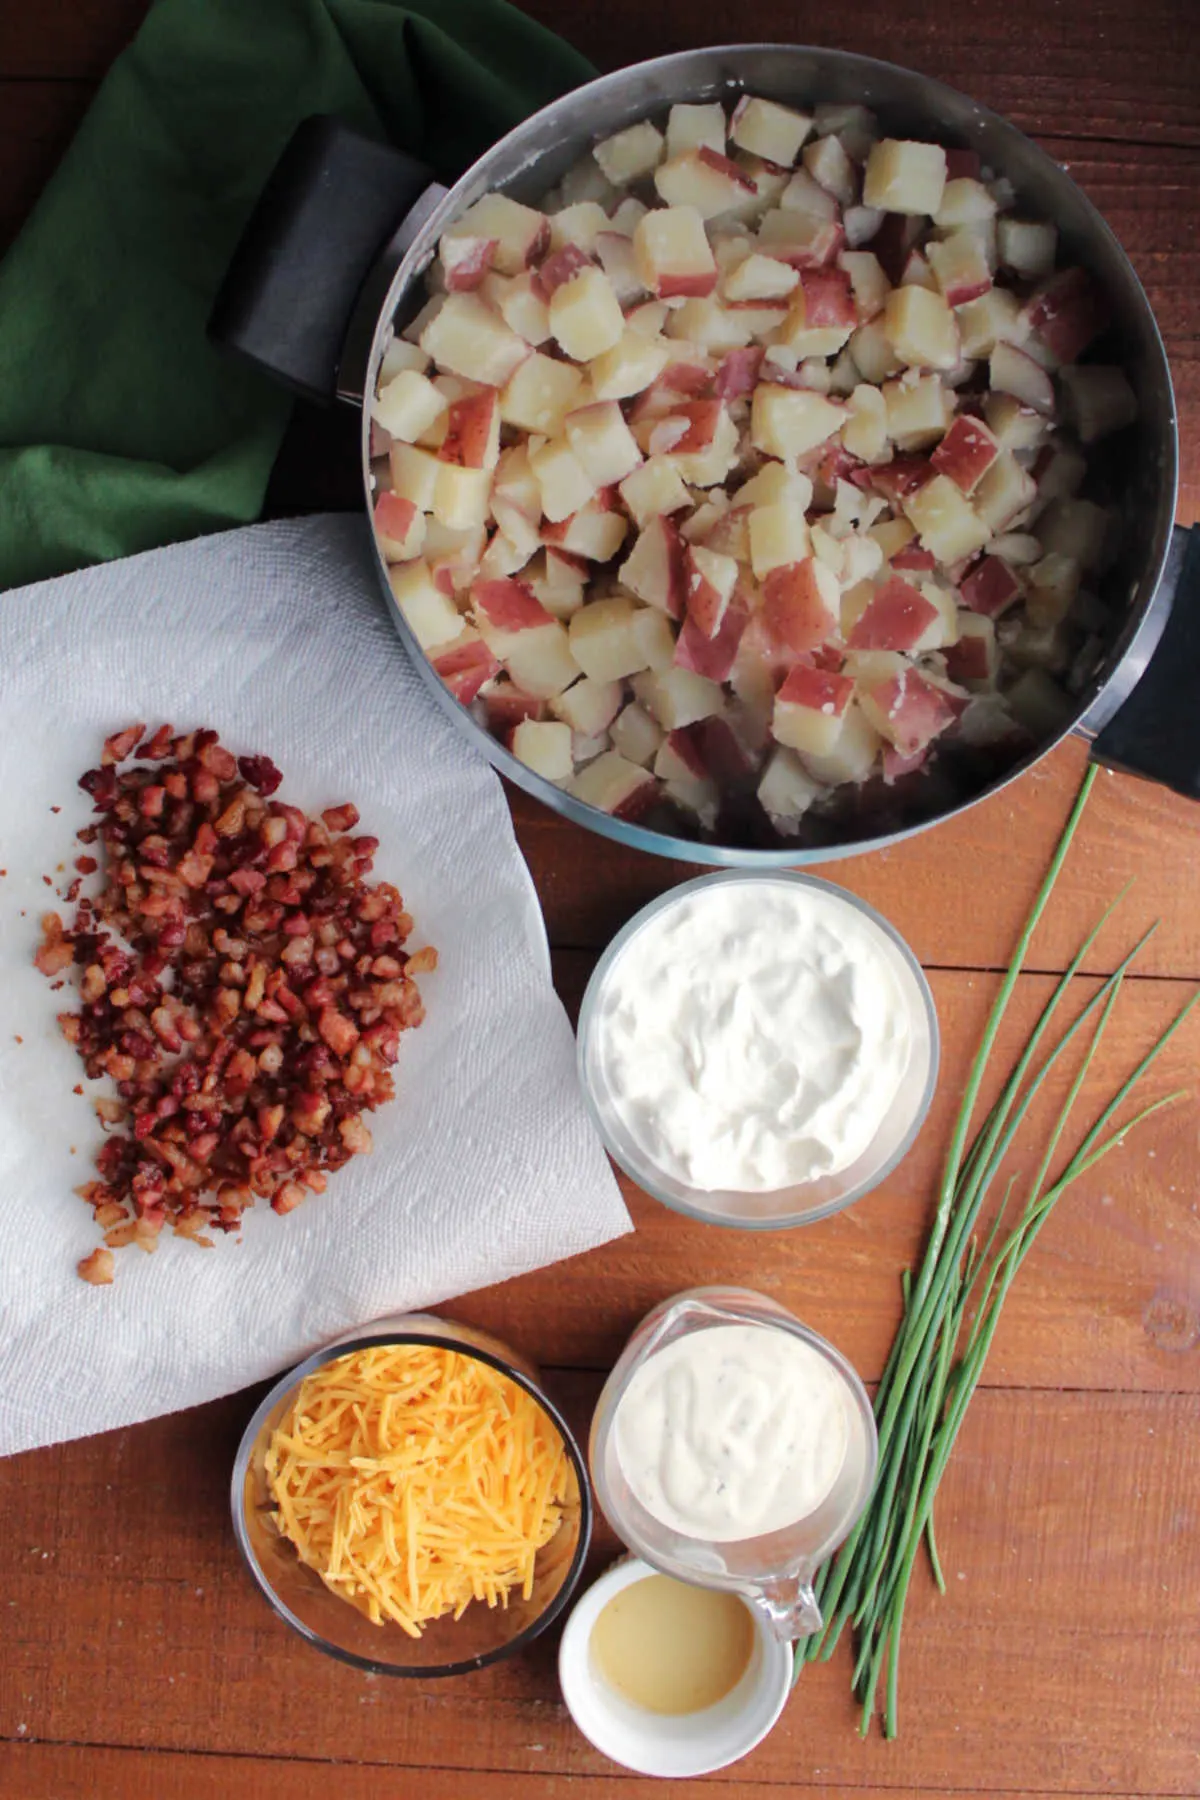 Ingredients including cooked red potato cubes, crumbled bacon, sour cream, ranch dressing, apple cider vinegar, cheddar cheese, and fresh chives.